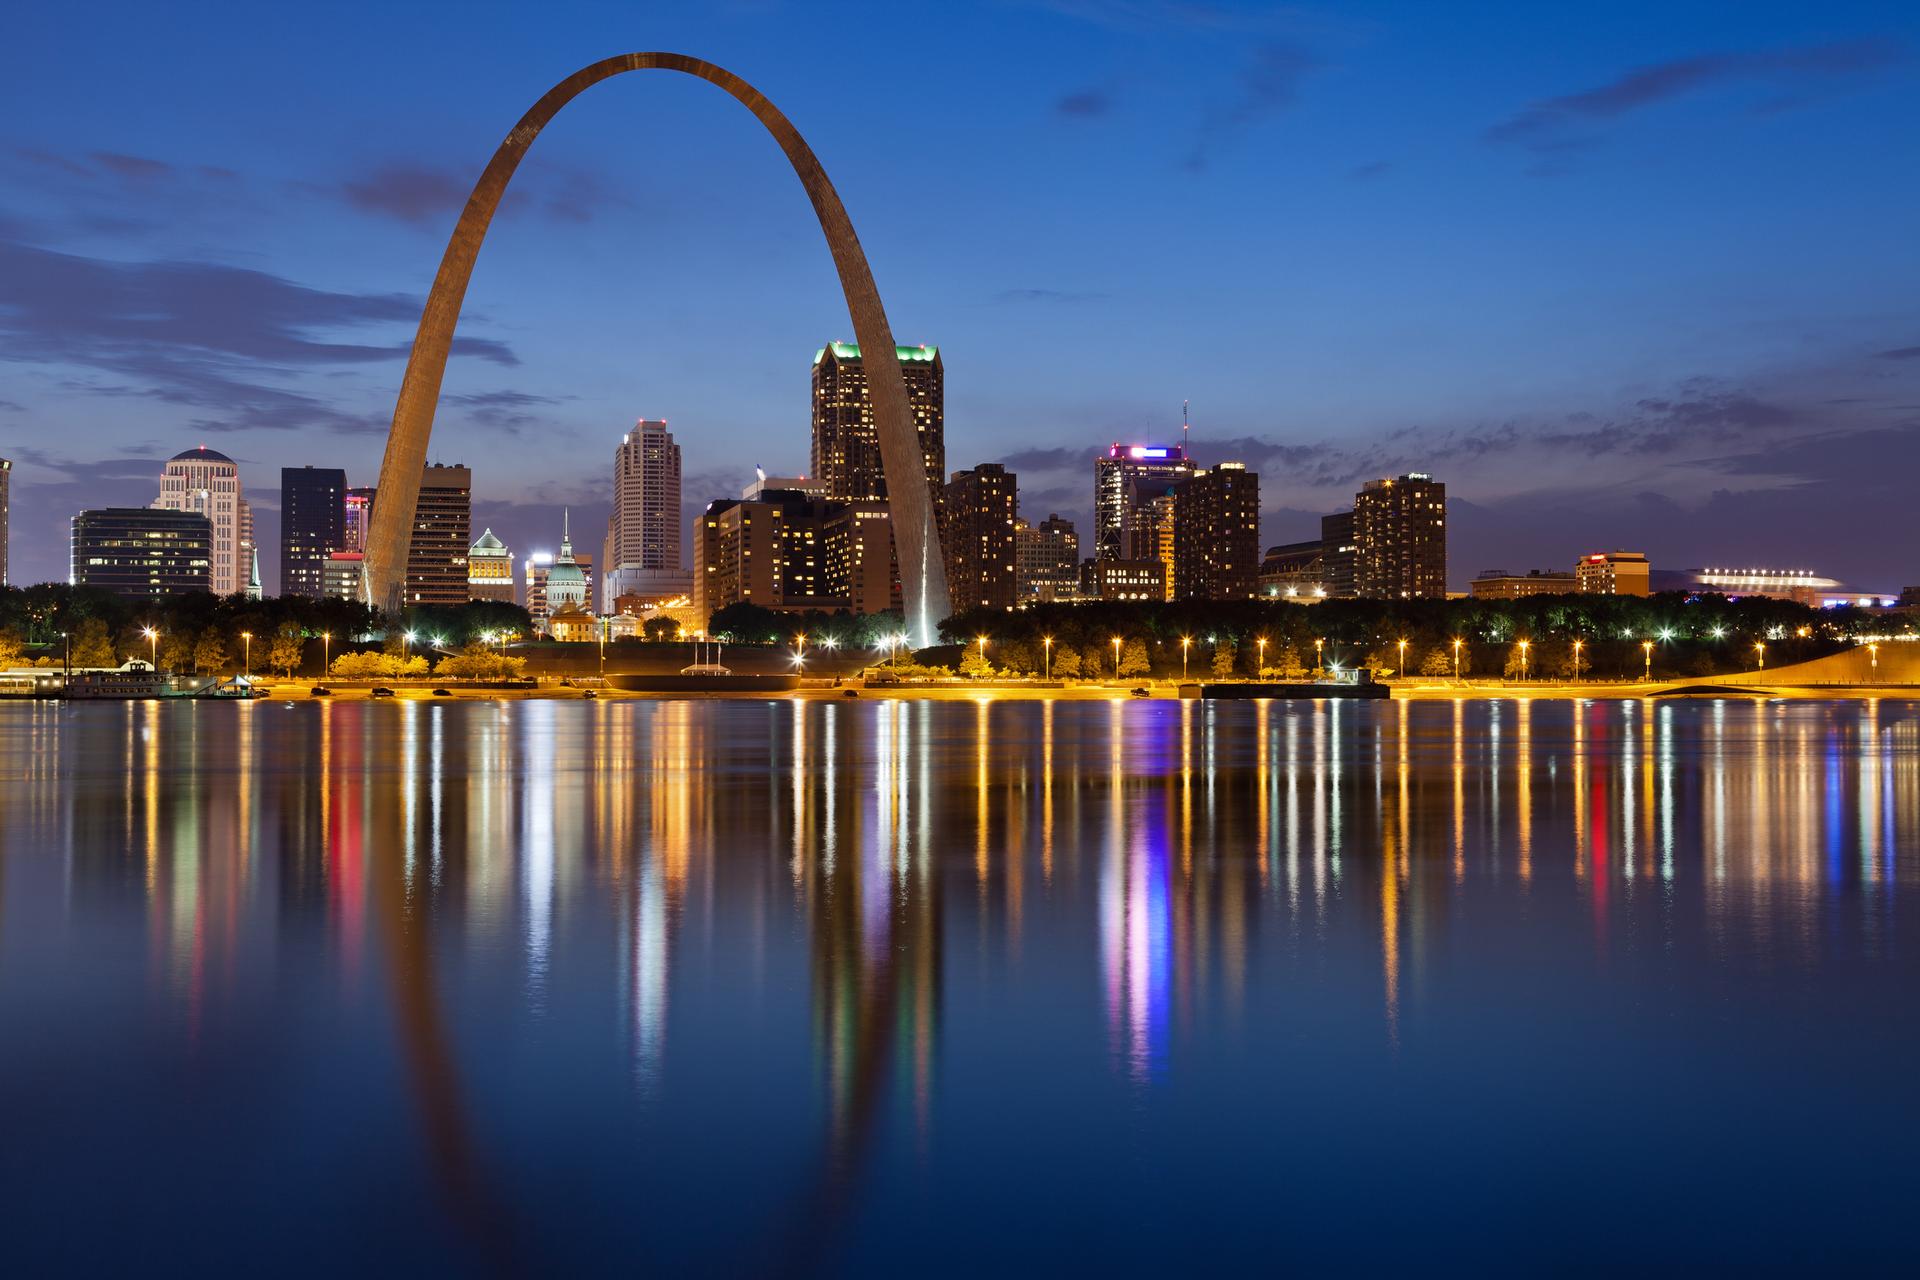 St. Louis downtown with Gateway Arch at twilight